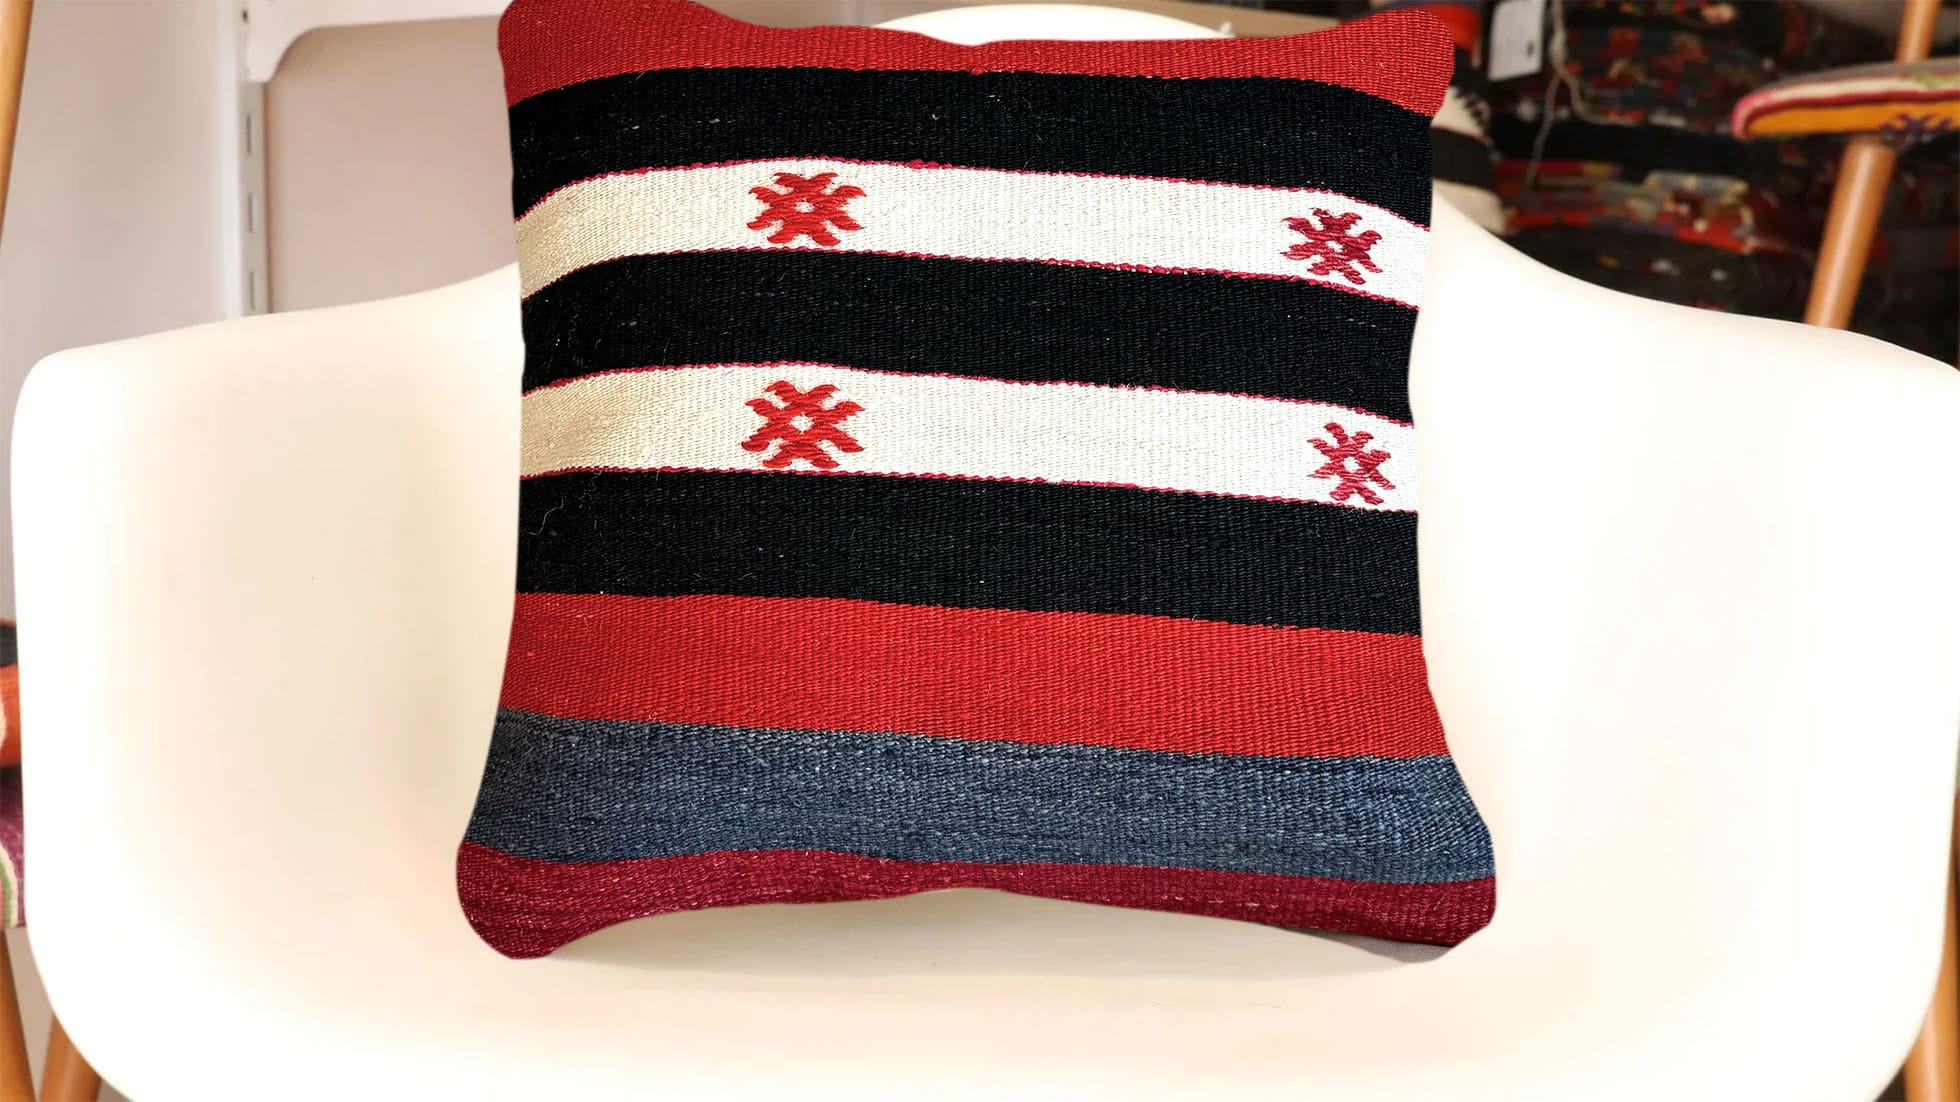 Vintage Handwoven Kilim Pillow with Red / Black / White Stripes & Motifs at Kilim Couture New York Rug Gallery